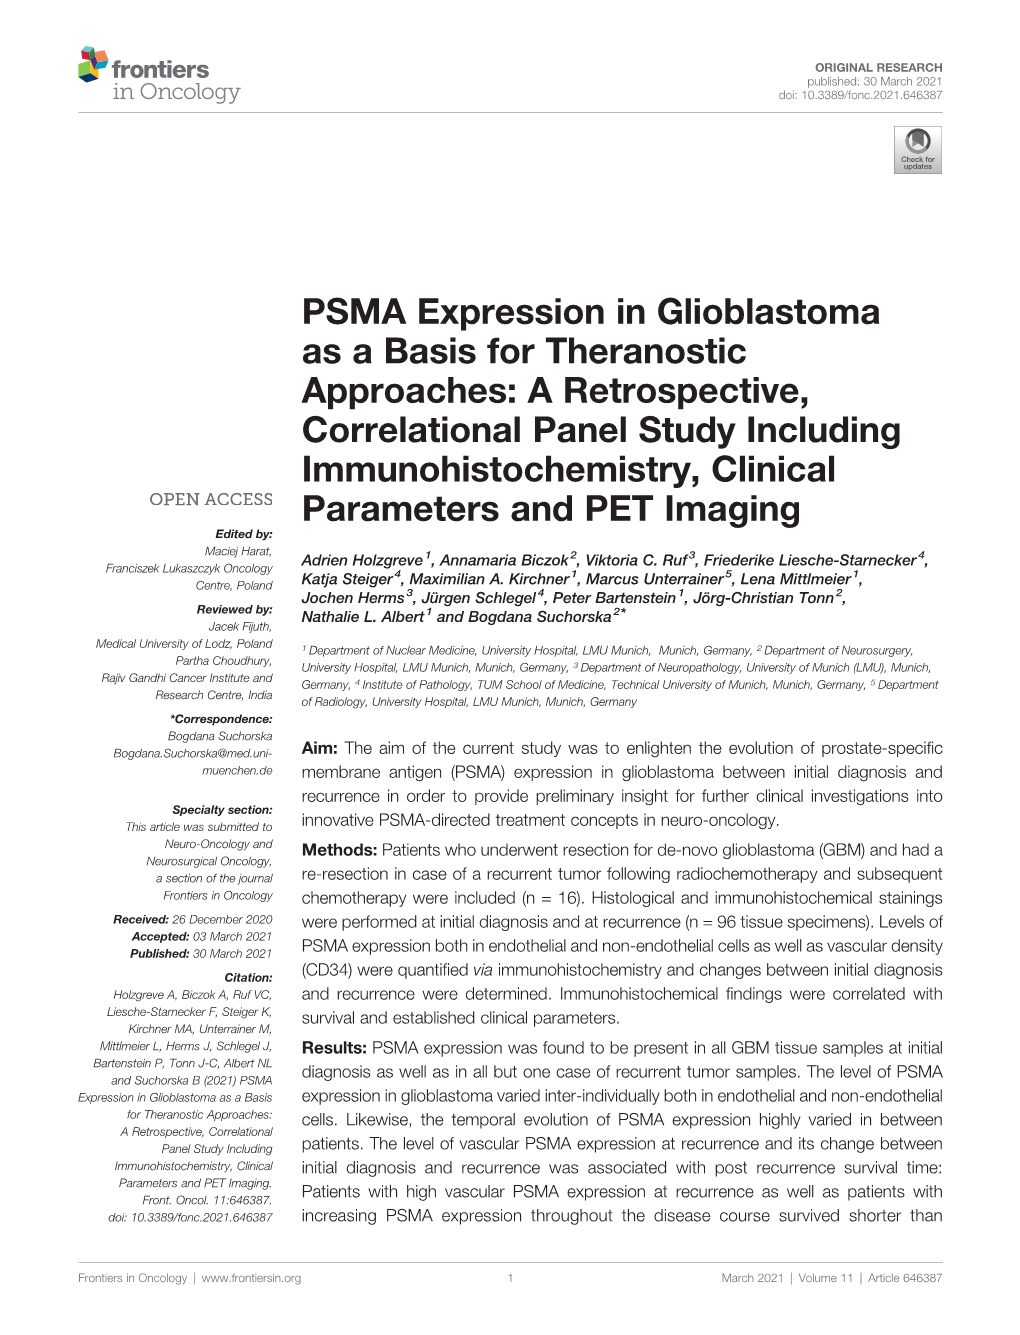 PSMA Expression in Glioblastoma As a Basis for Theranostic Approaches